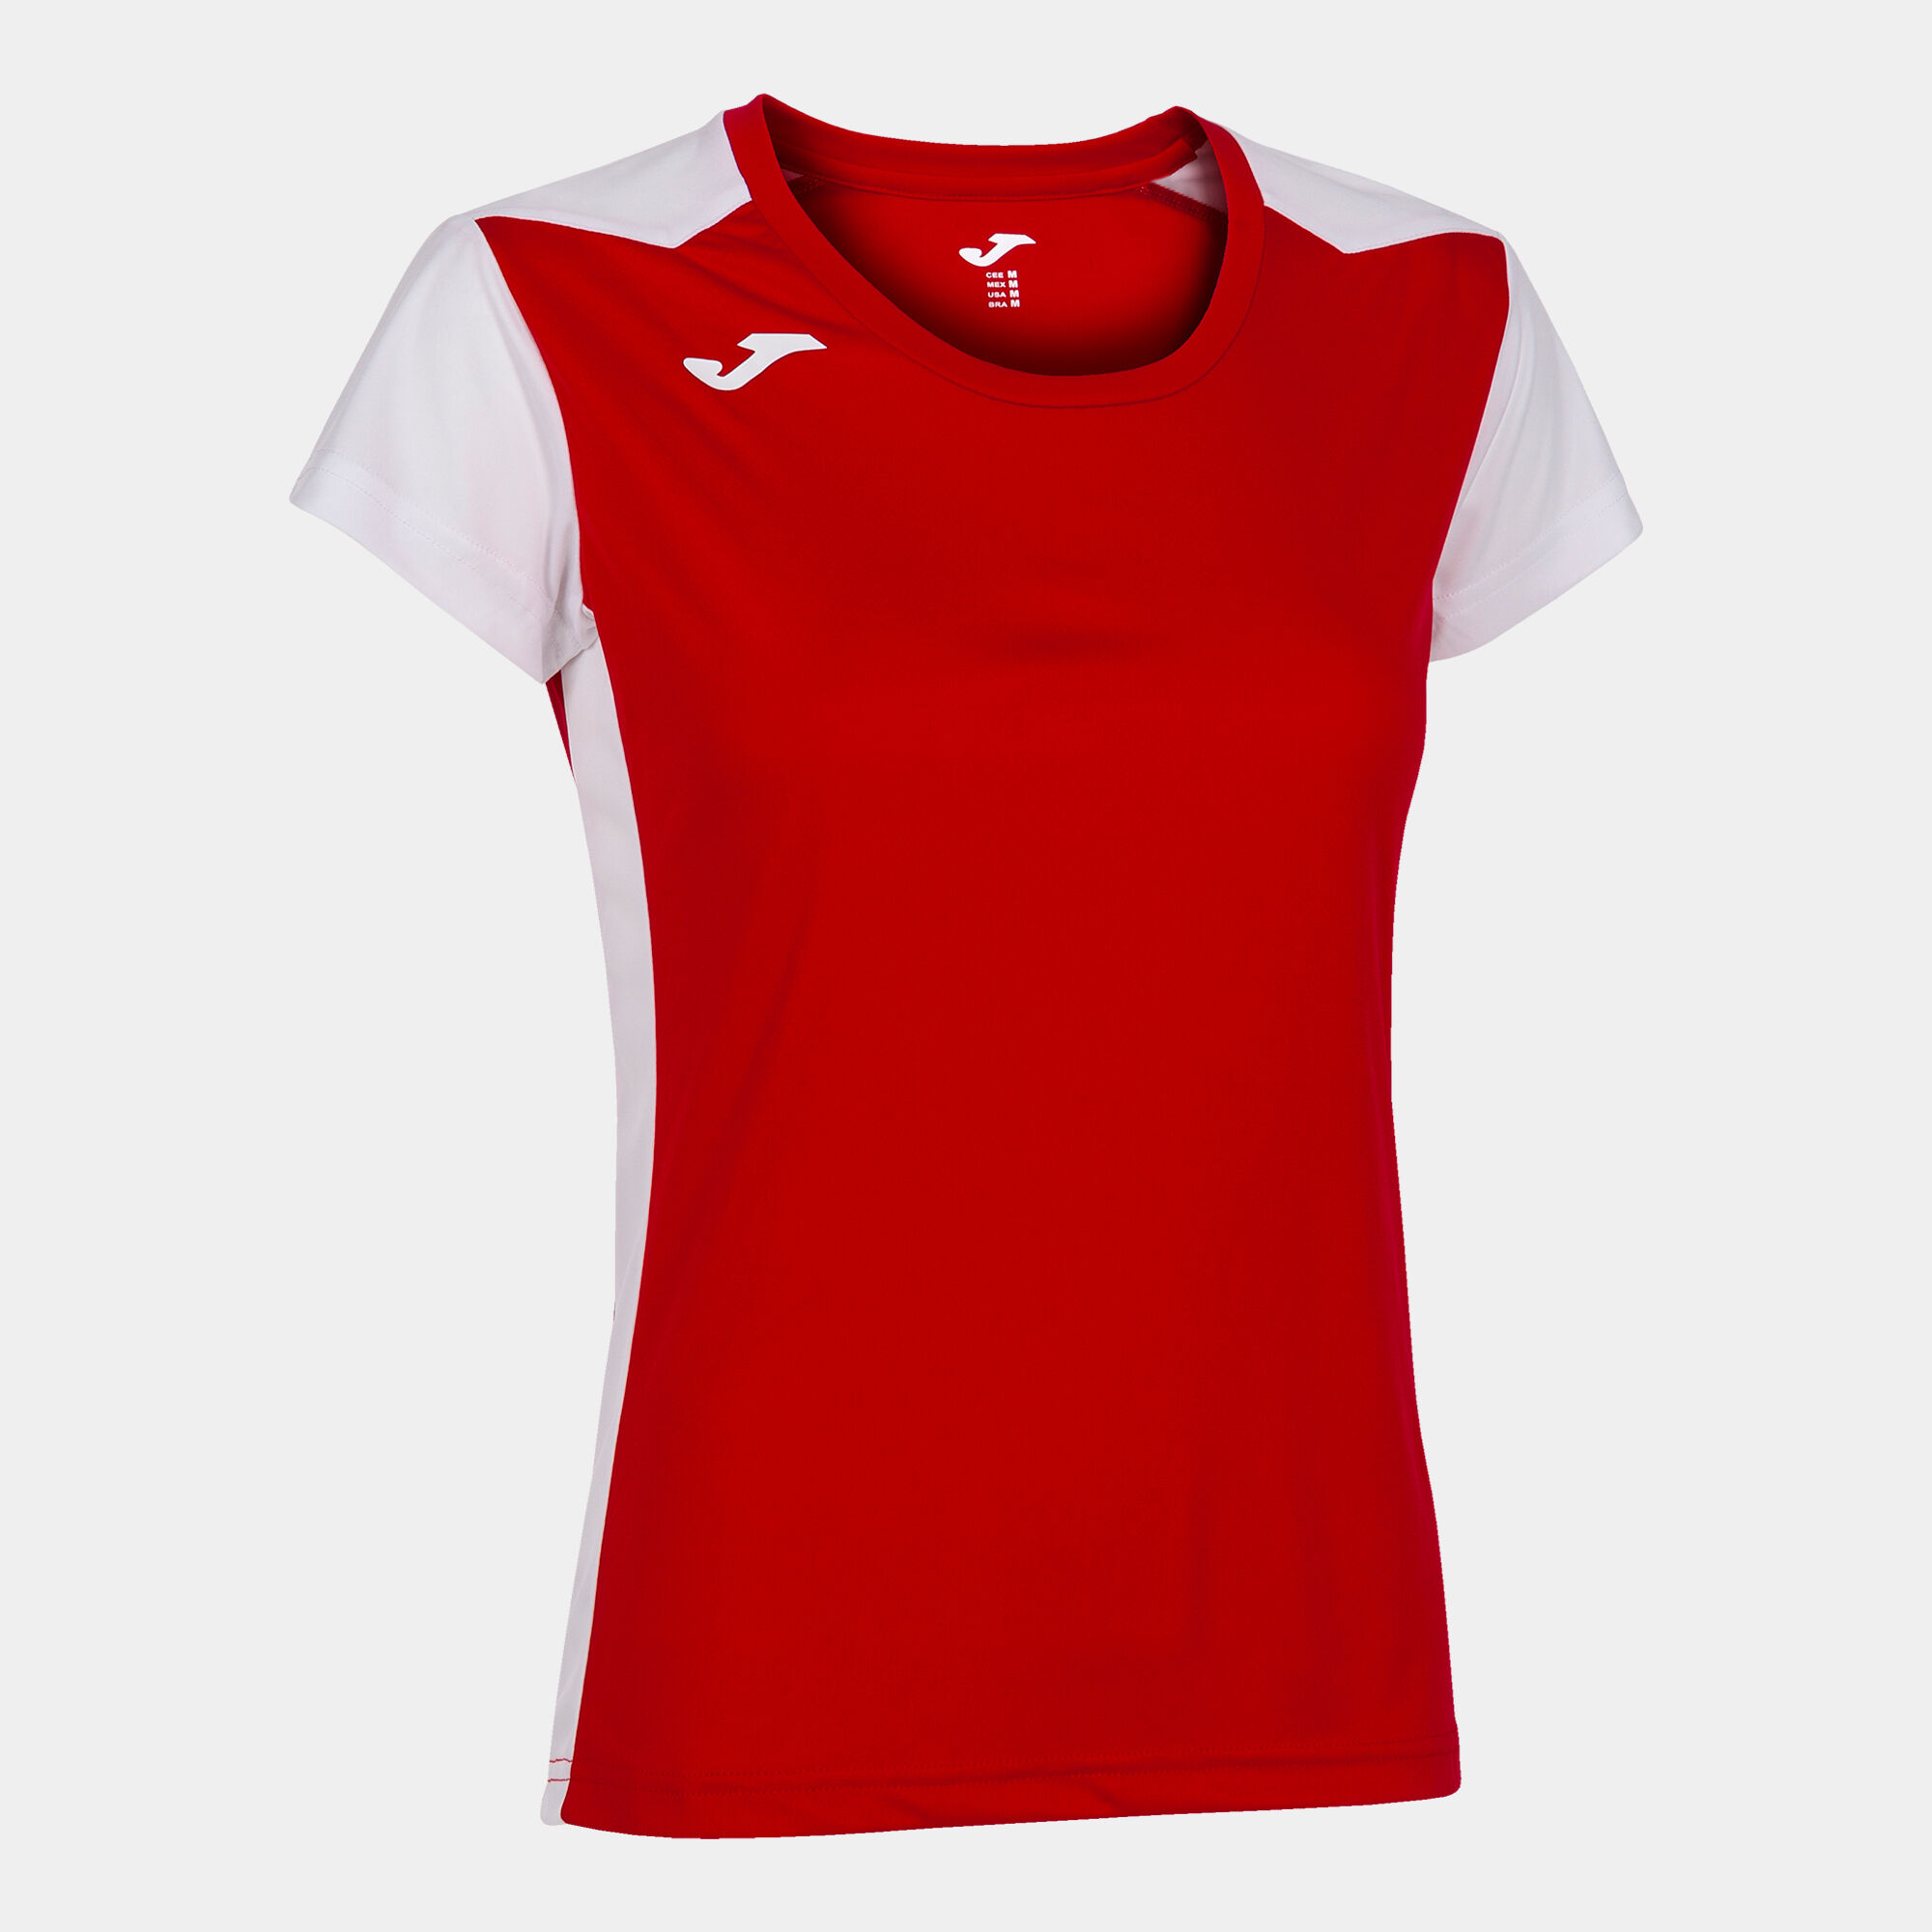 MAILLOT MANCHES COURTES FEMME RECORD II ROUGE BLANC